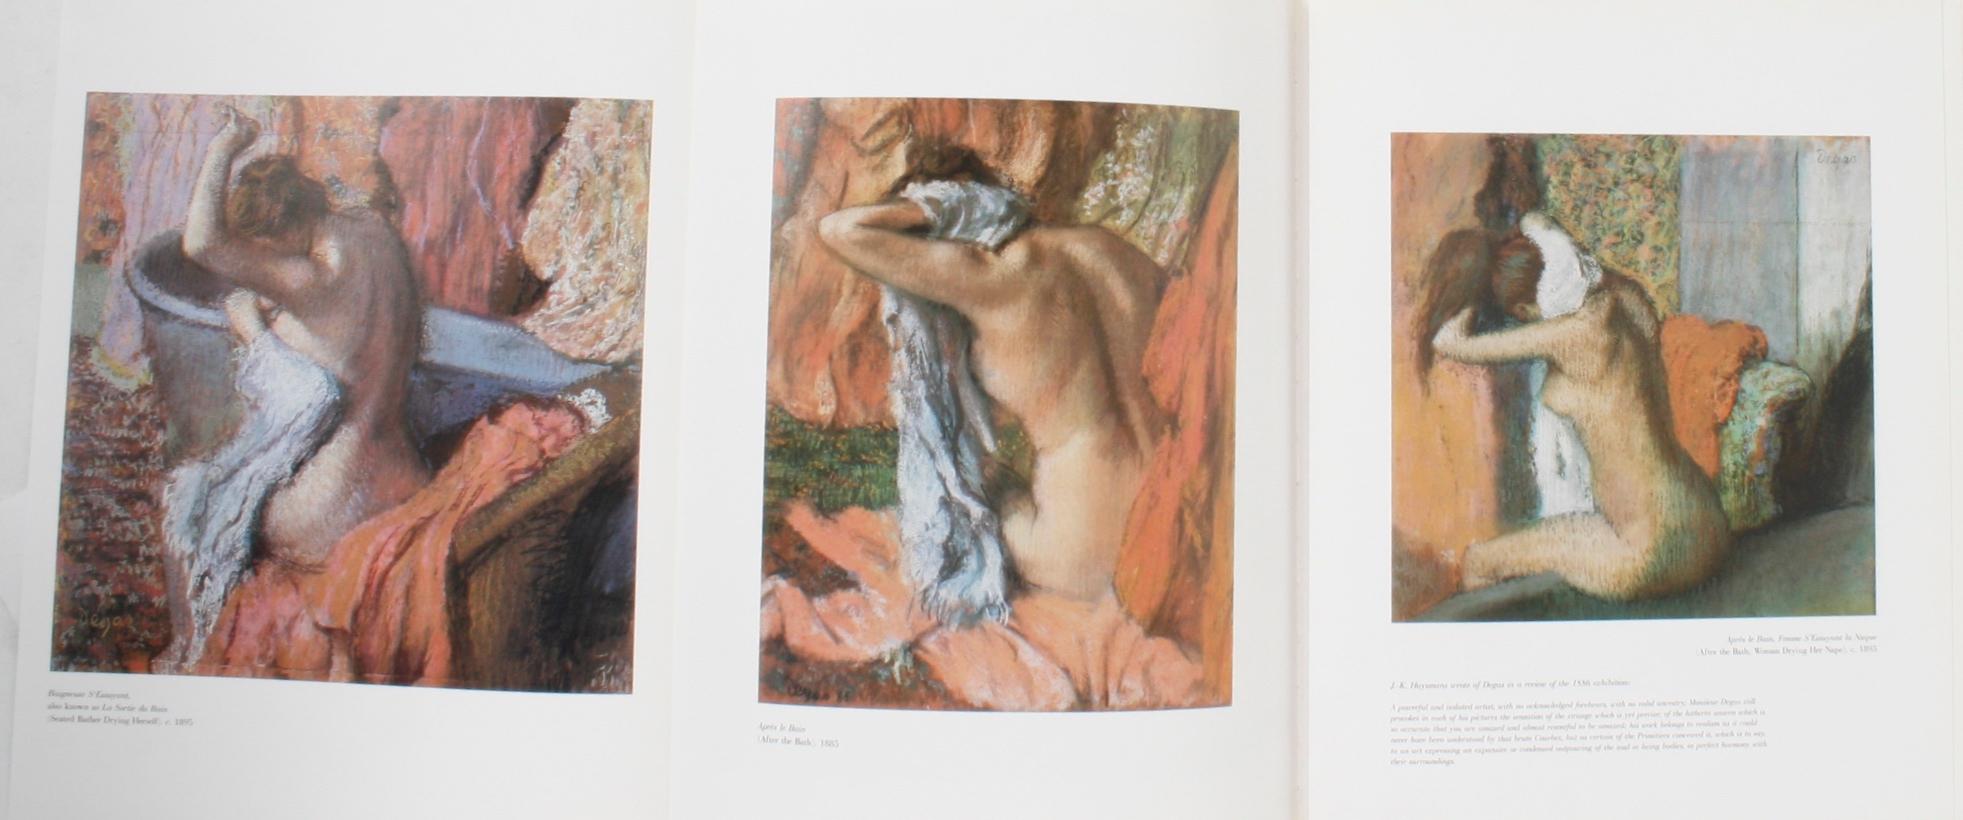 Degas by Robert Gordon and Andrew Forge, Signed and Inscribed Edition 12